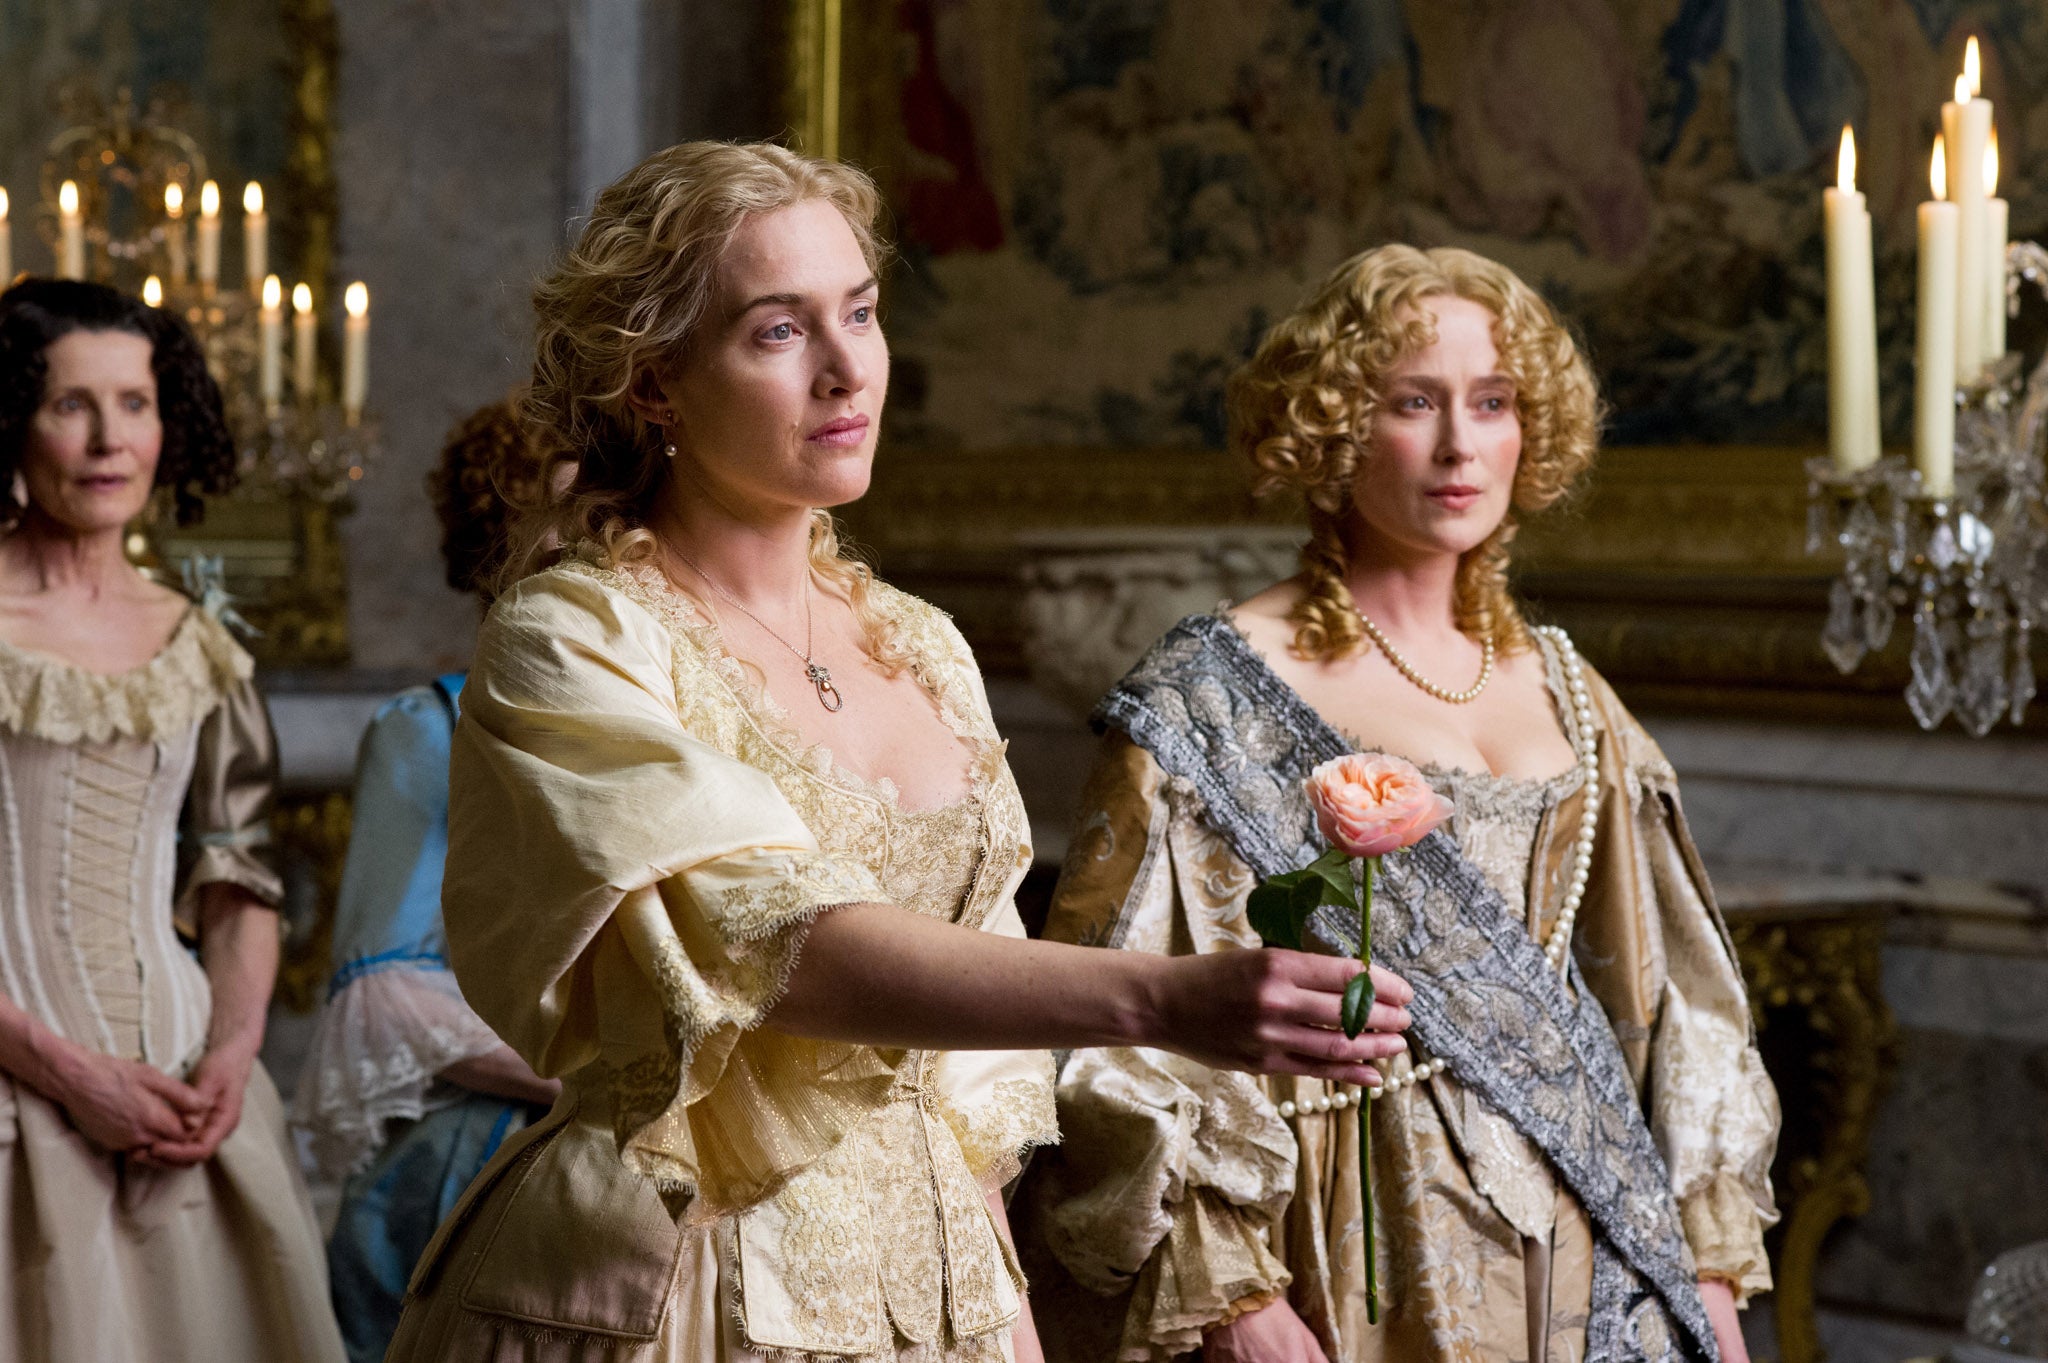 Kate Winslet stars in A Little Chaos